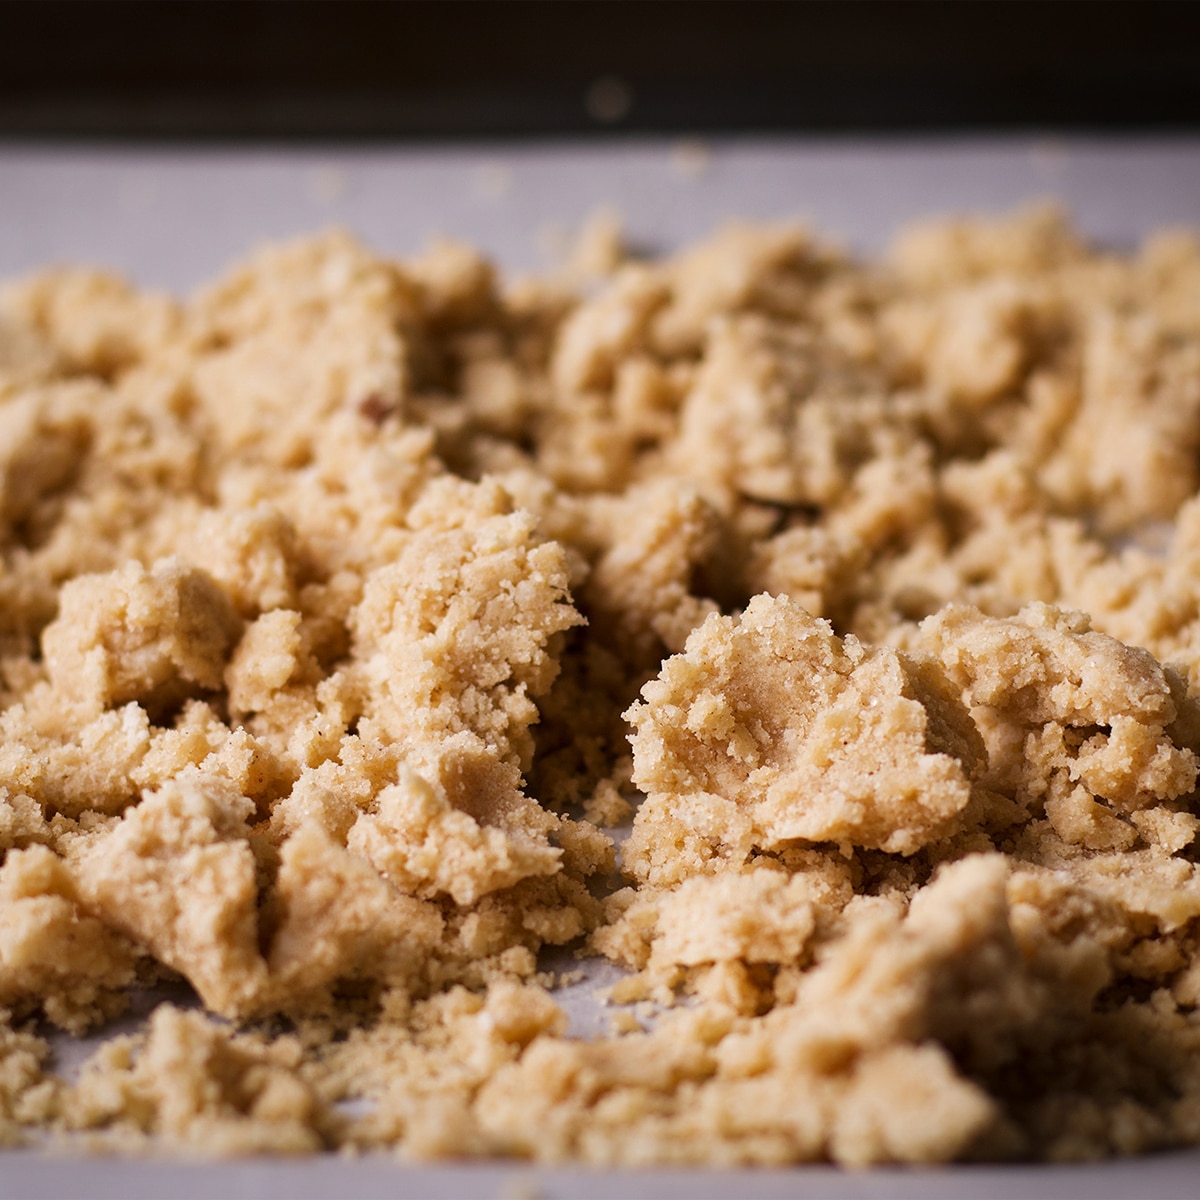 Crumb topping for cherry crumble bars spread out on a piece of parchment paper.